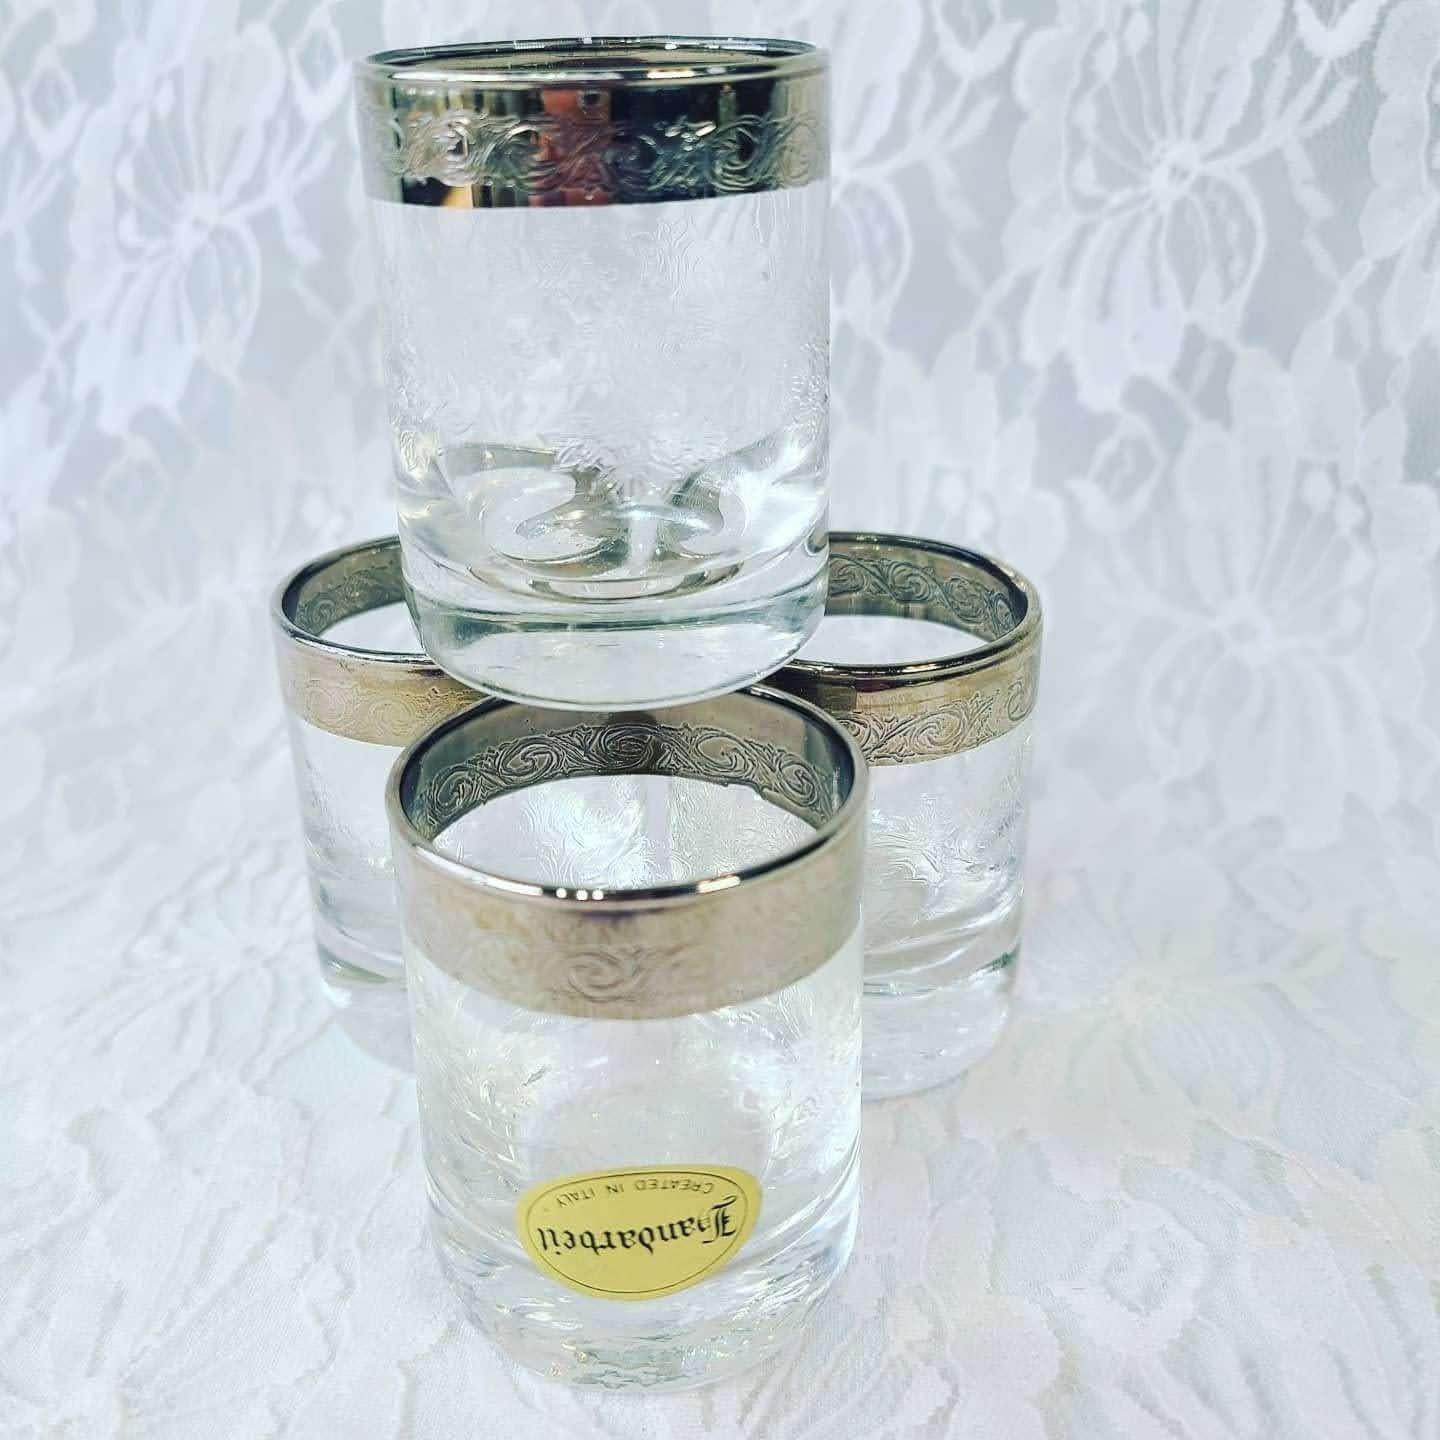 Shot Glasses Set of 4 ~ Mid Century Vintage 1950's ITALY Handerbeit - Silver Rimmed Hand-Etched~ Retro Drinking Glasses - Antique Barware